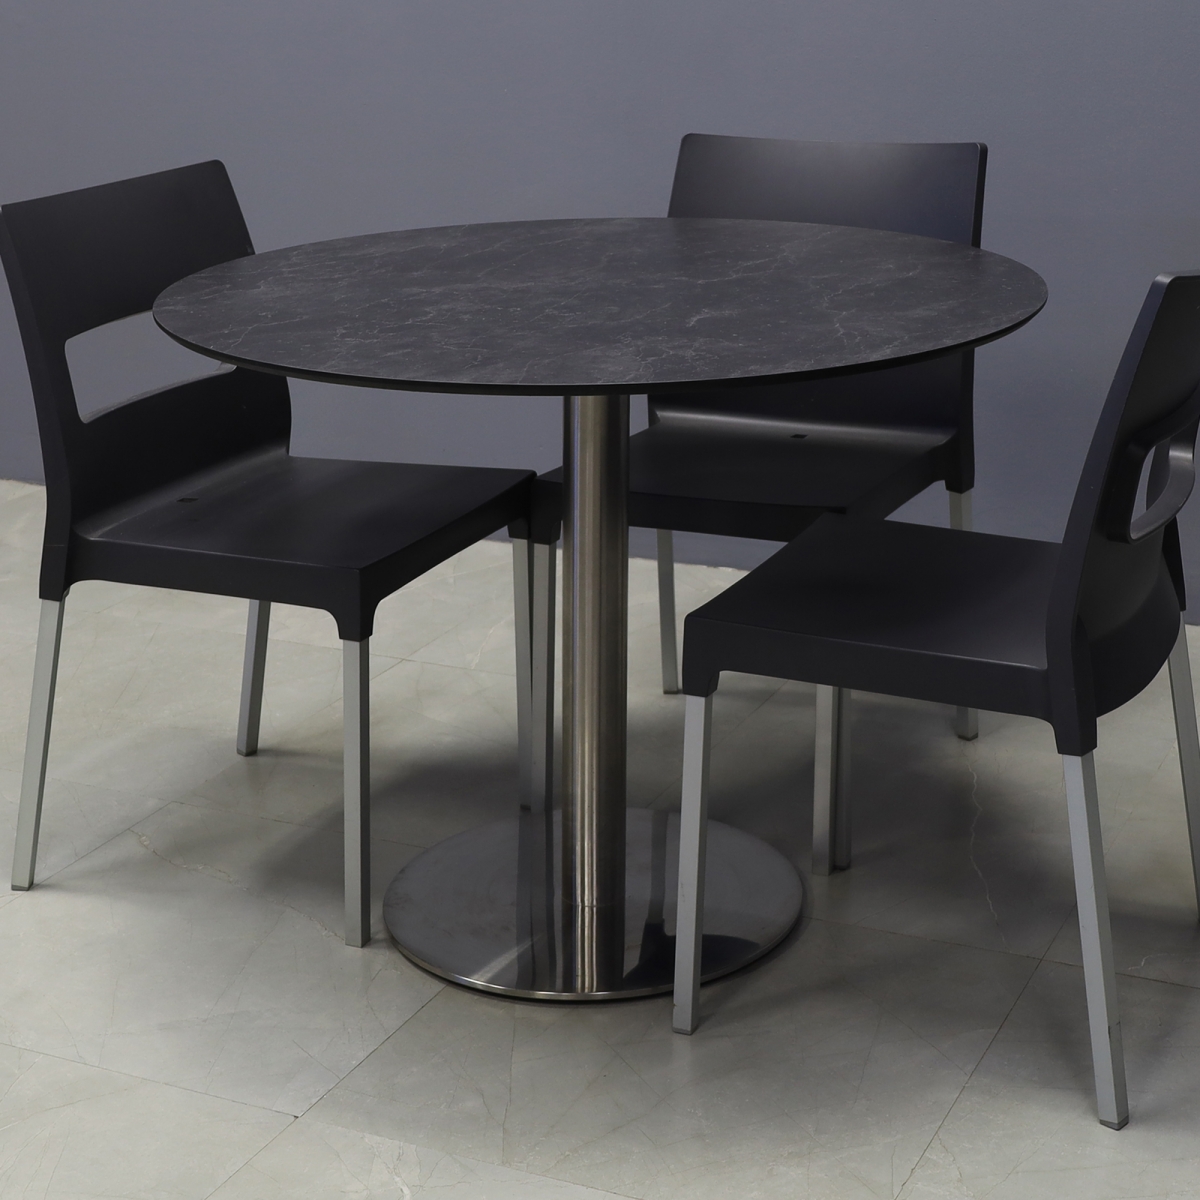 California Round Engineered Stone Cafeteria Table